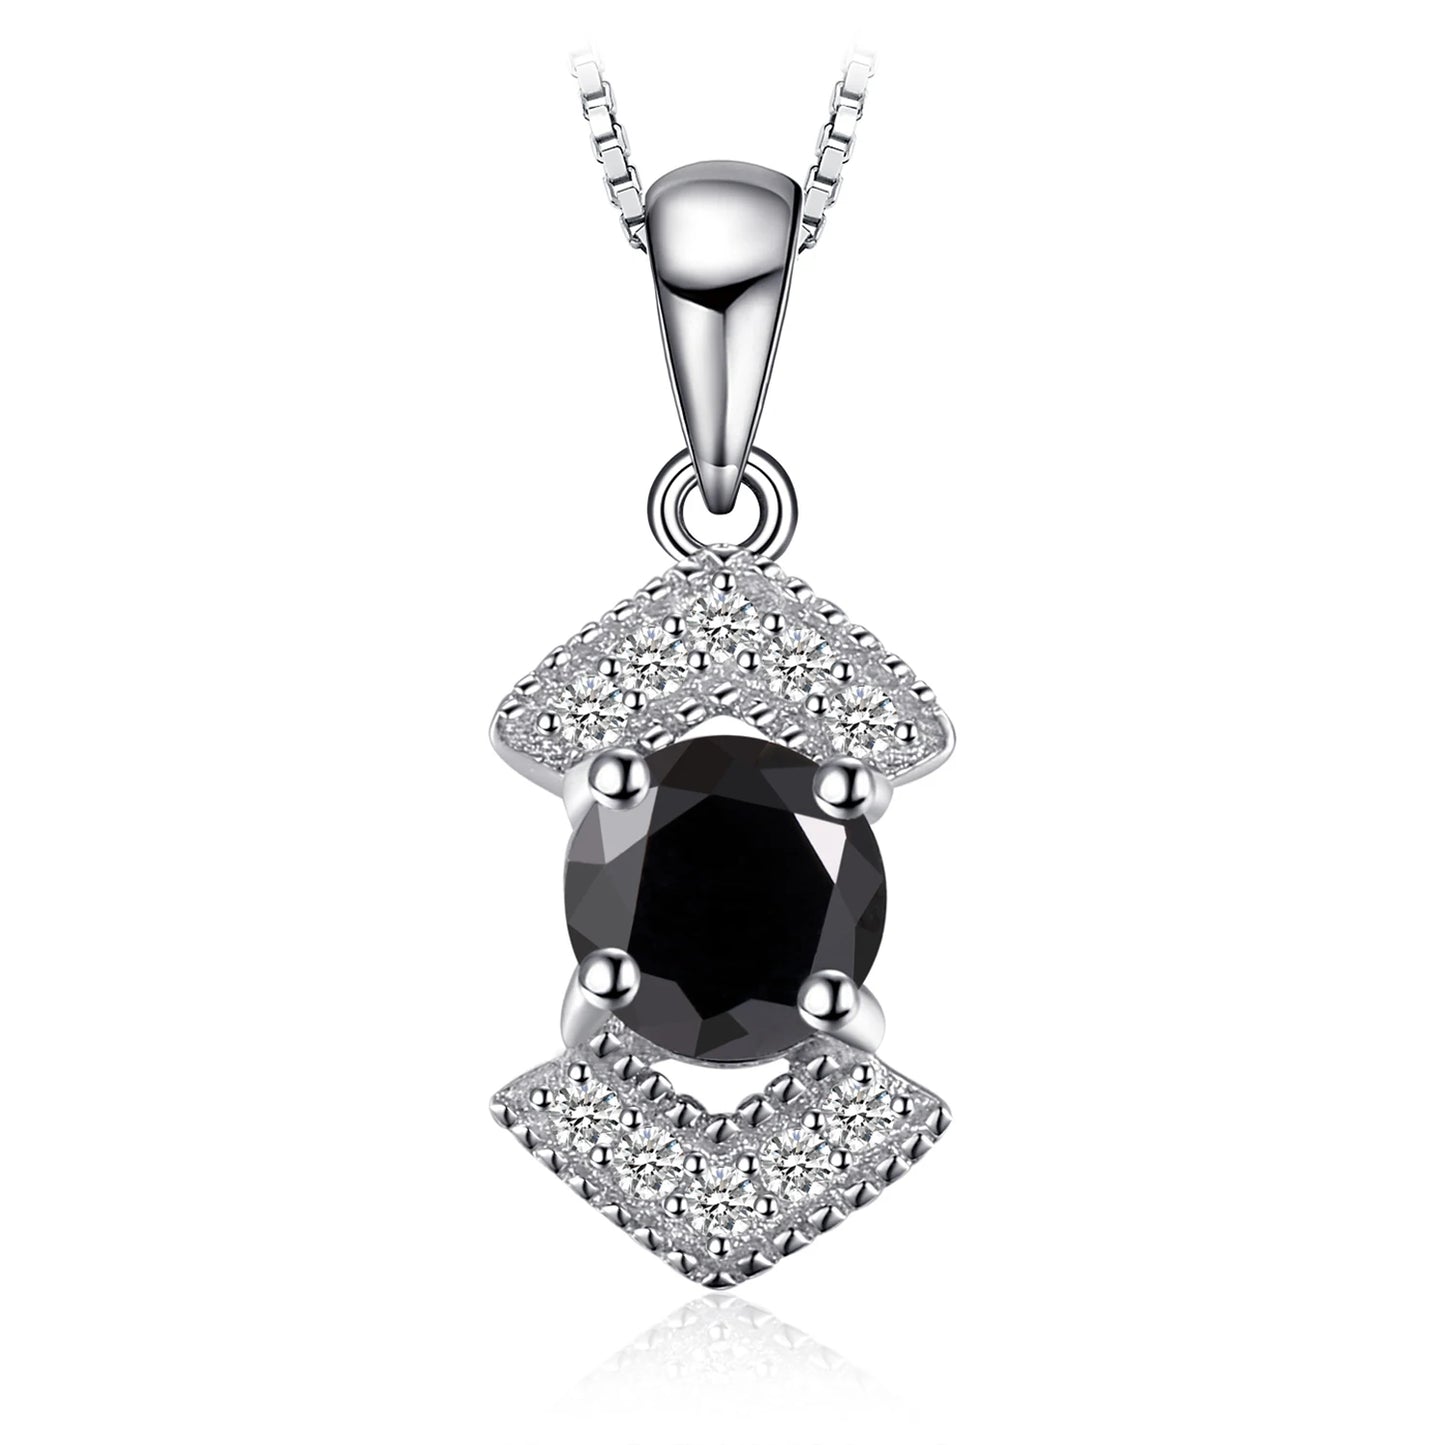 JewelryPalace Natural Black Spinel 925 Sterling Silver Pendant Necklace for Woman Fashion Jewelry No Chain AP223275